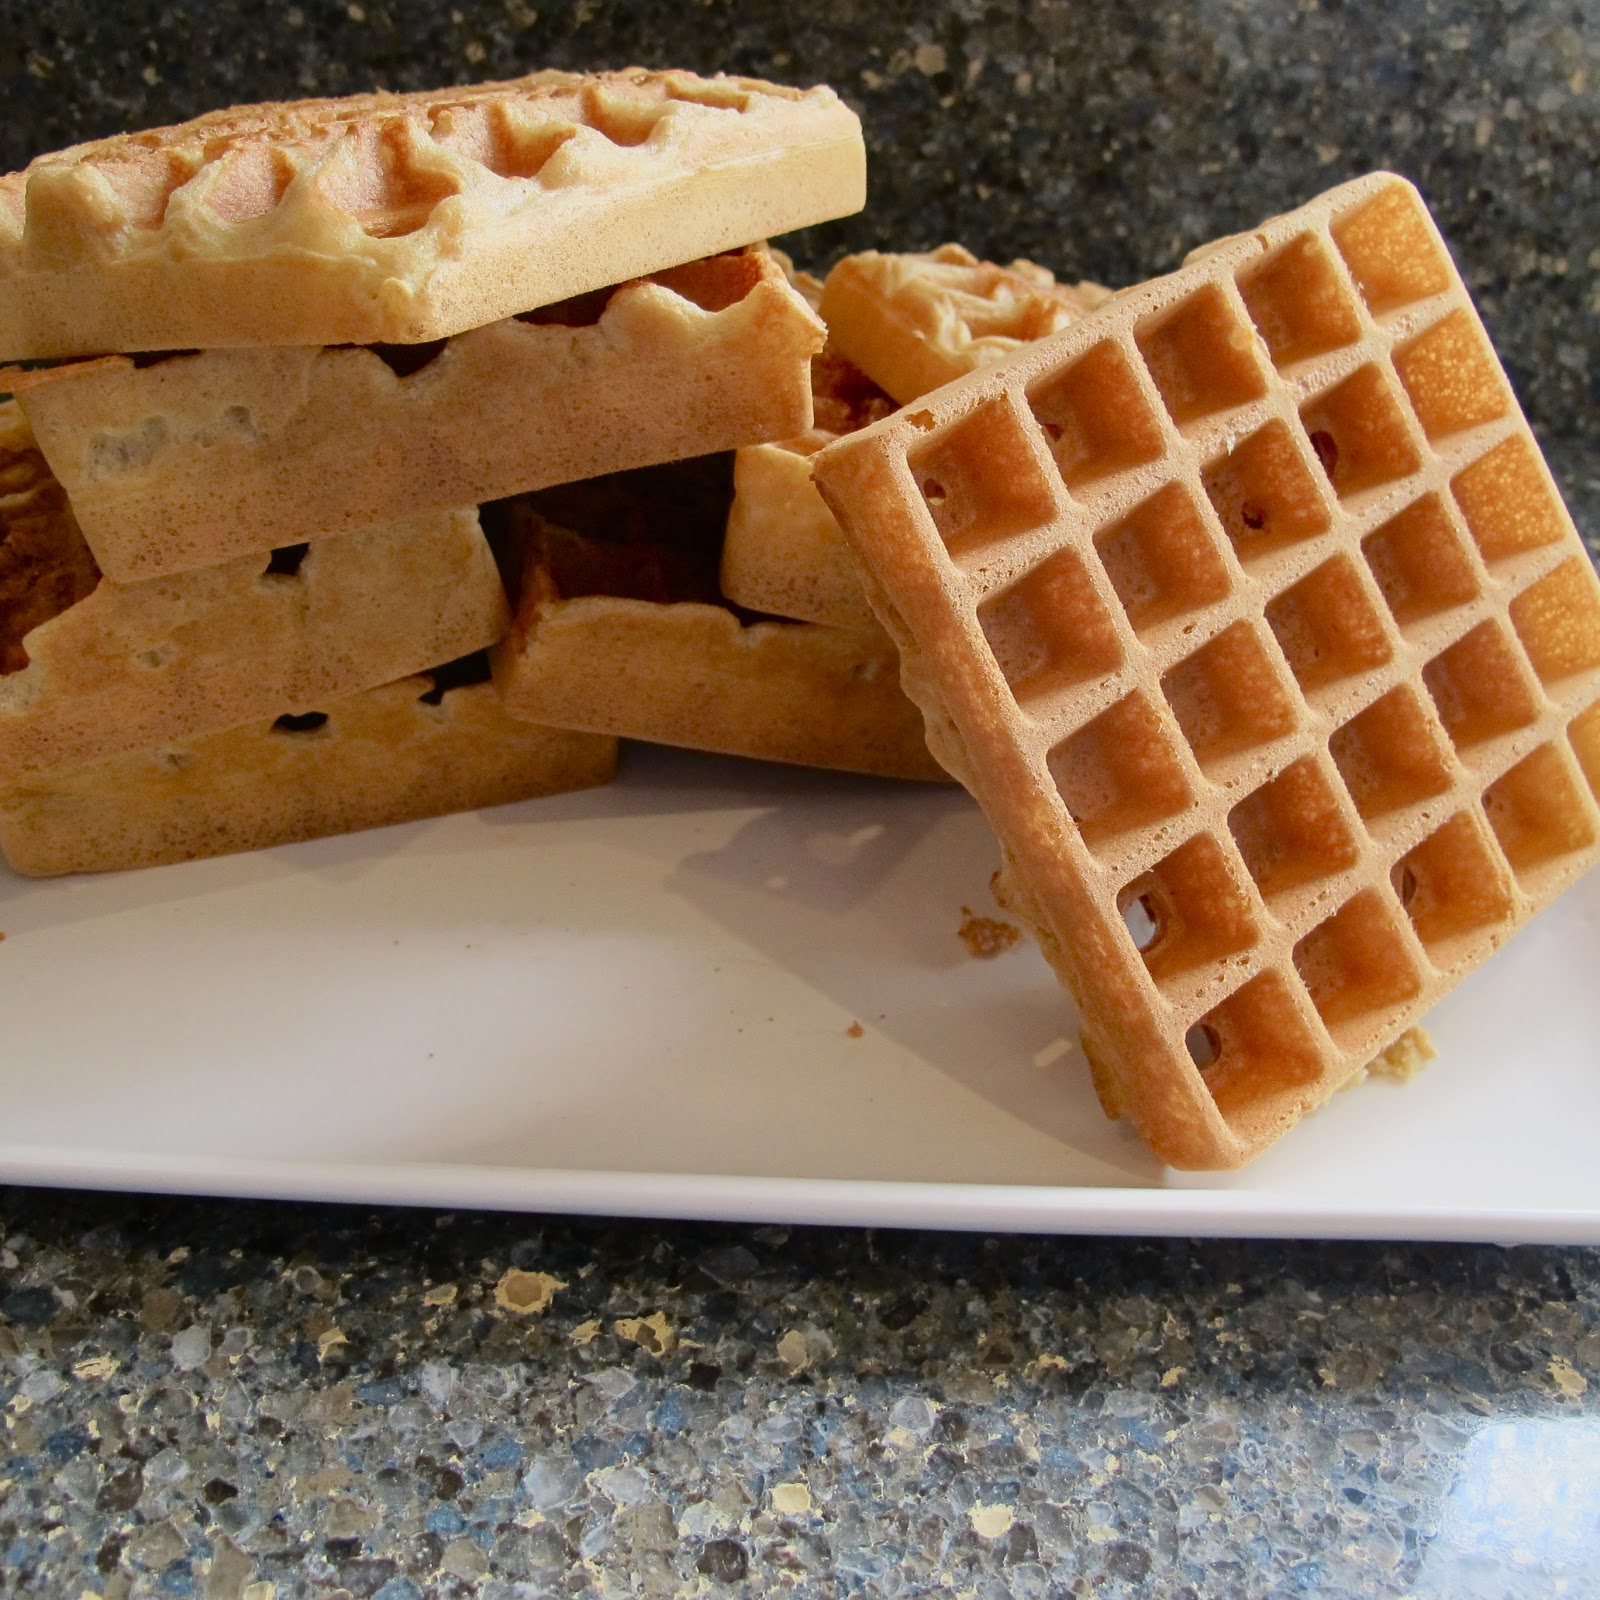 scratch how make  Handmade with pancakes vanilla Pancakes) Waffles (or from the from Homemade extract Home: to frozen